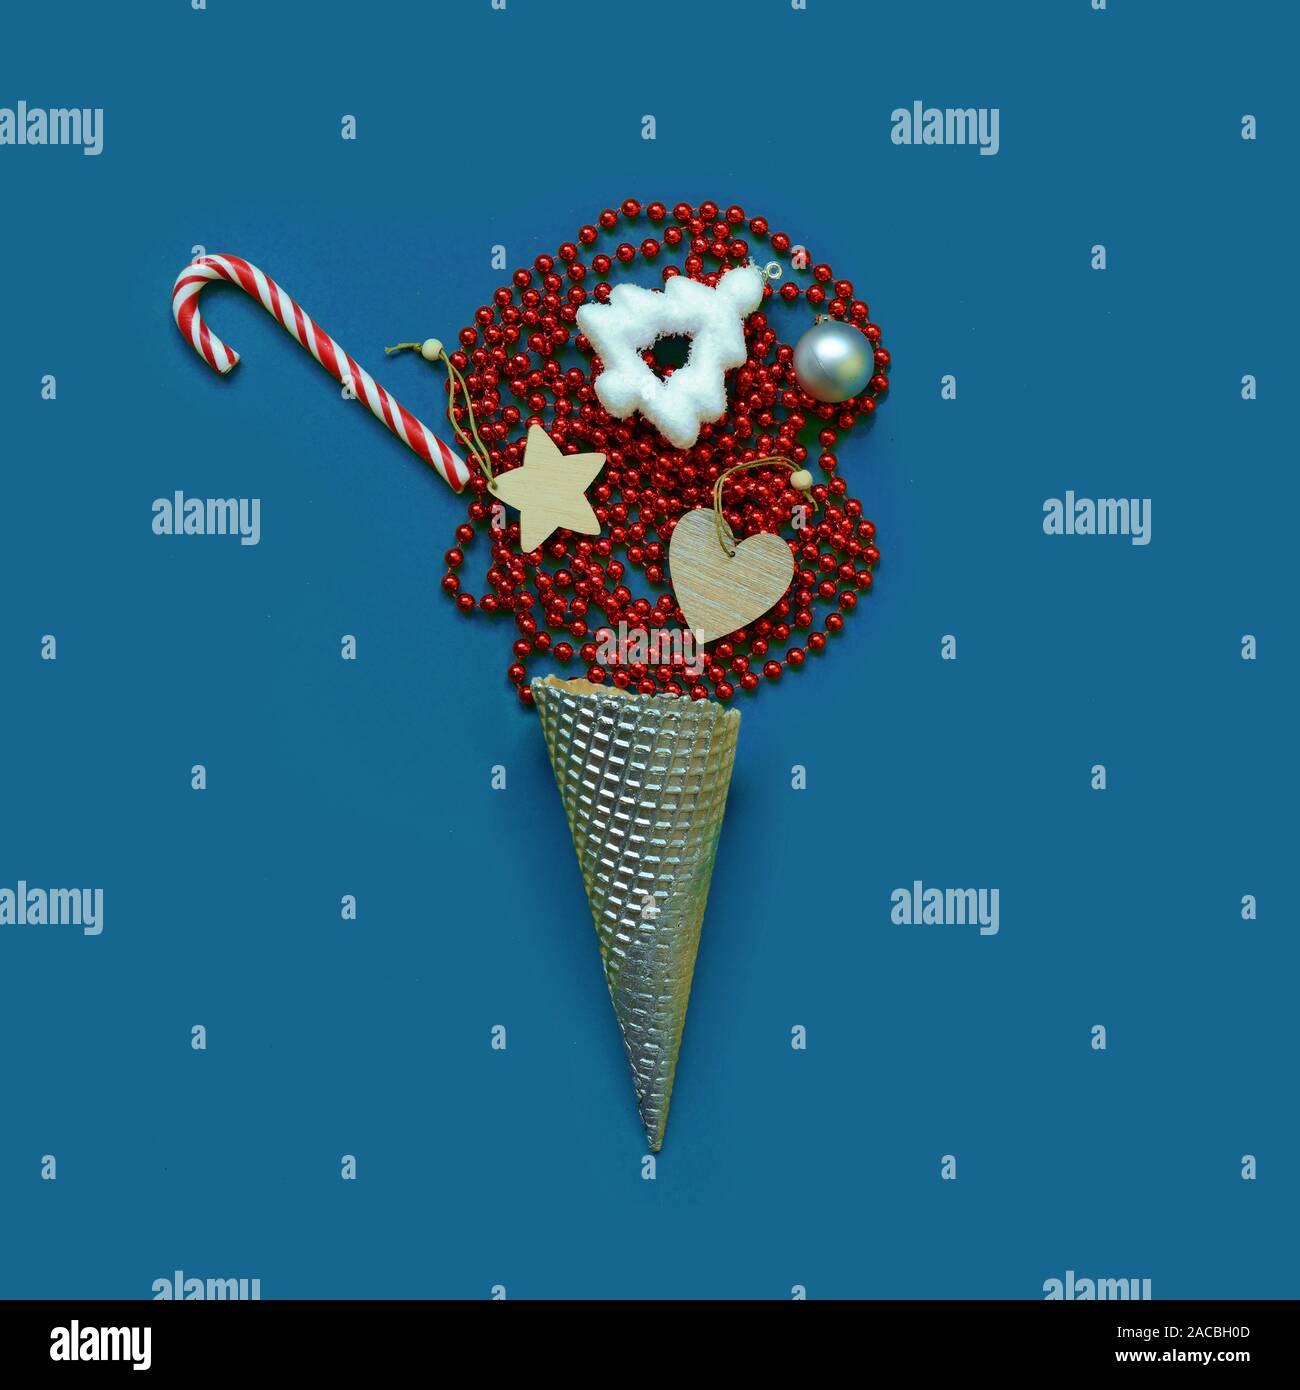 Trendy creative ice cream cone with various Christmas objects Stock Photo